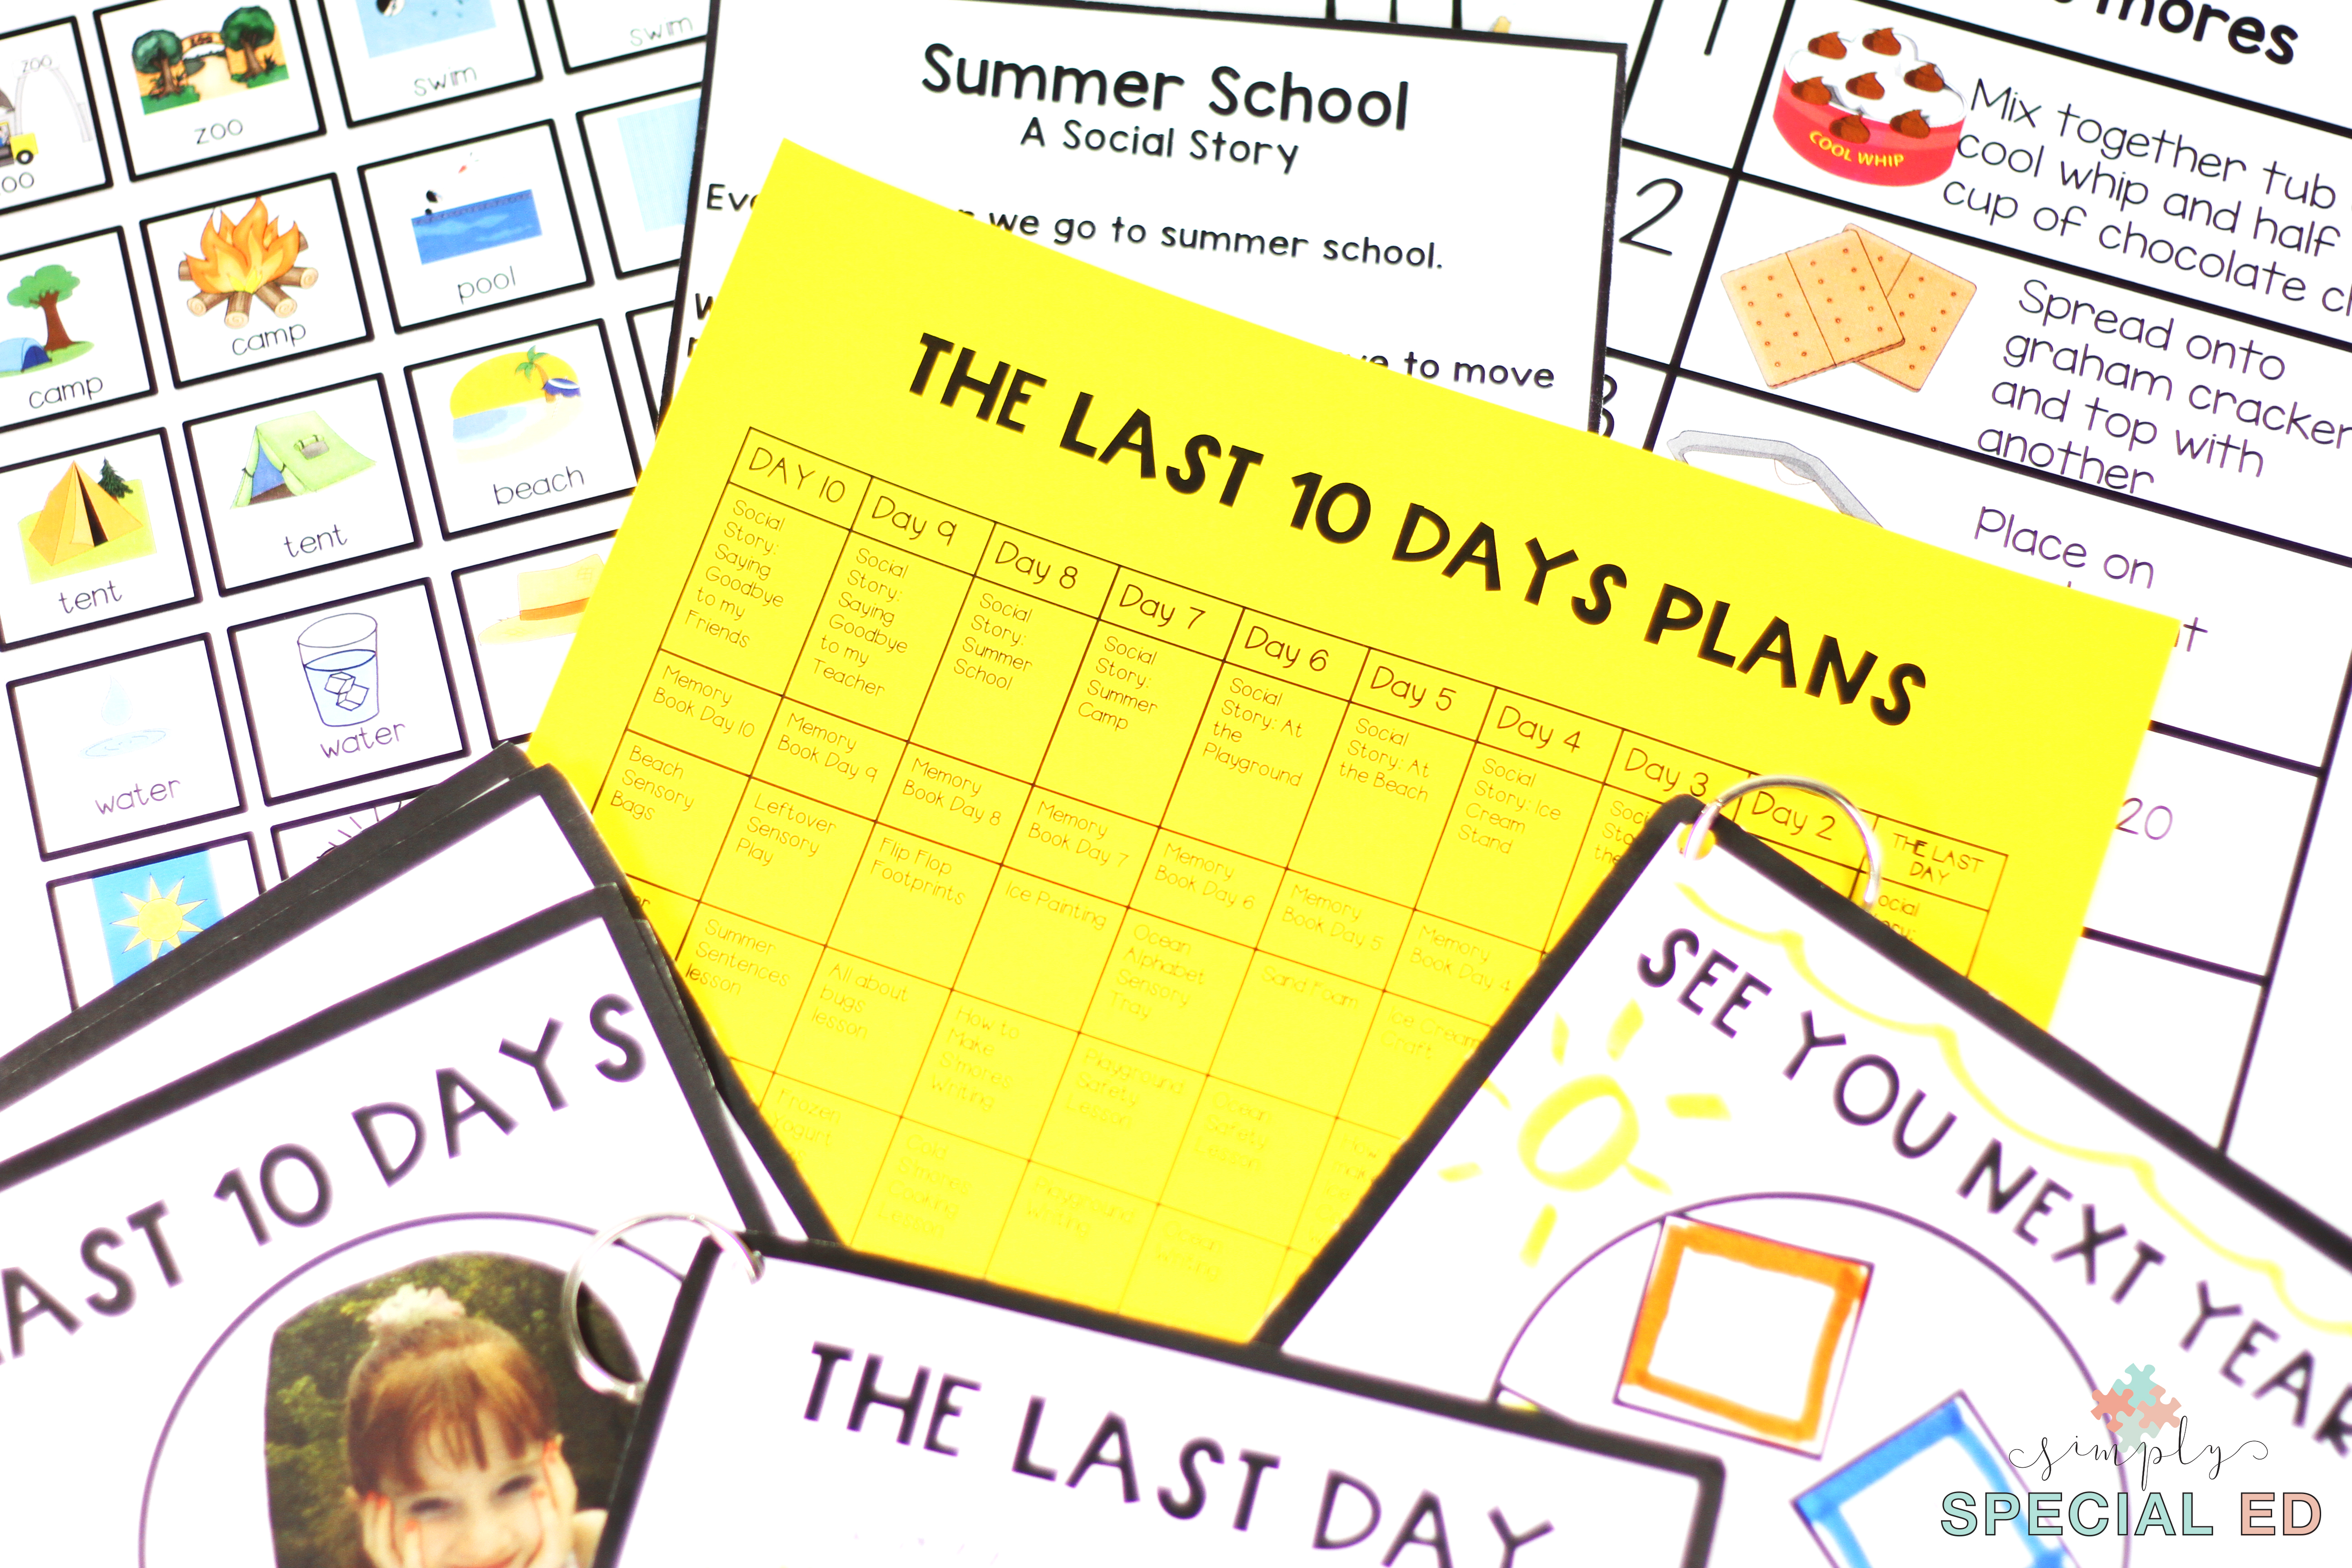 The last ten days plans for the last ten days of school in an Autism Clasroom